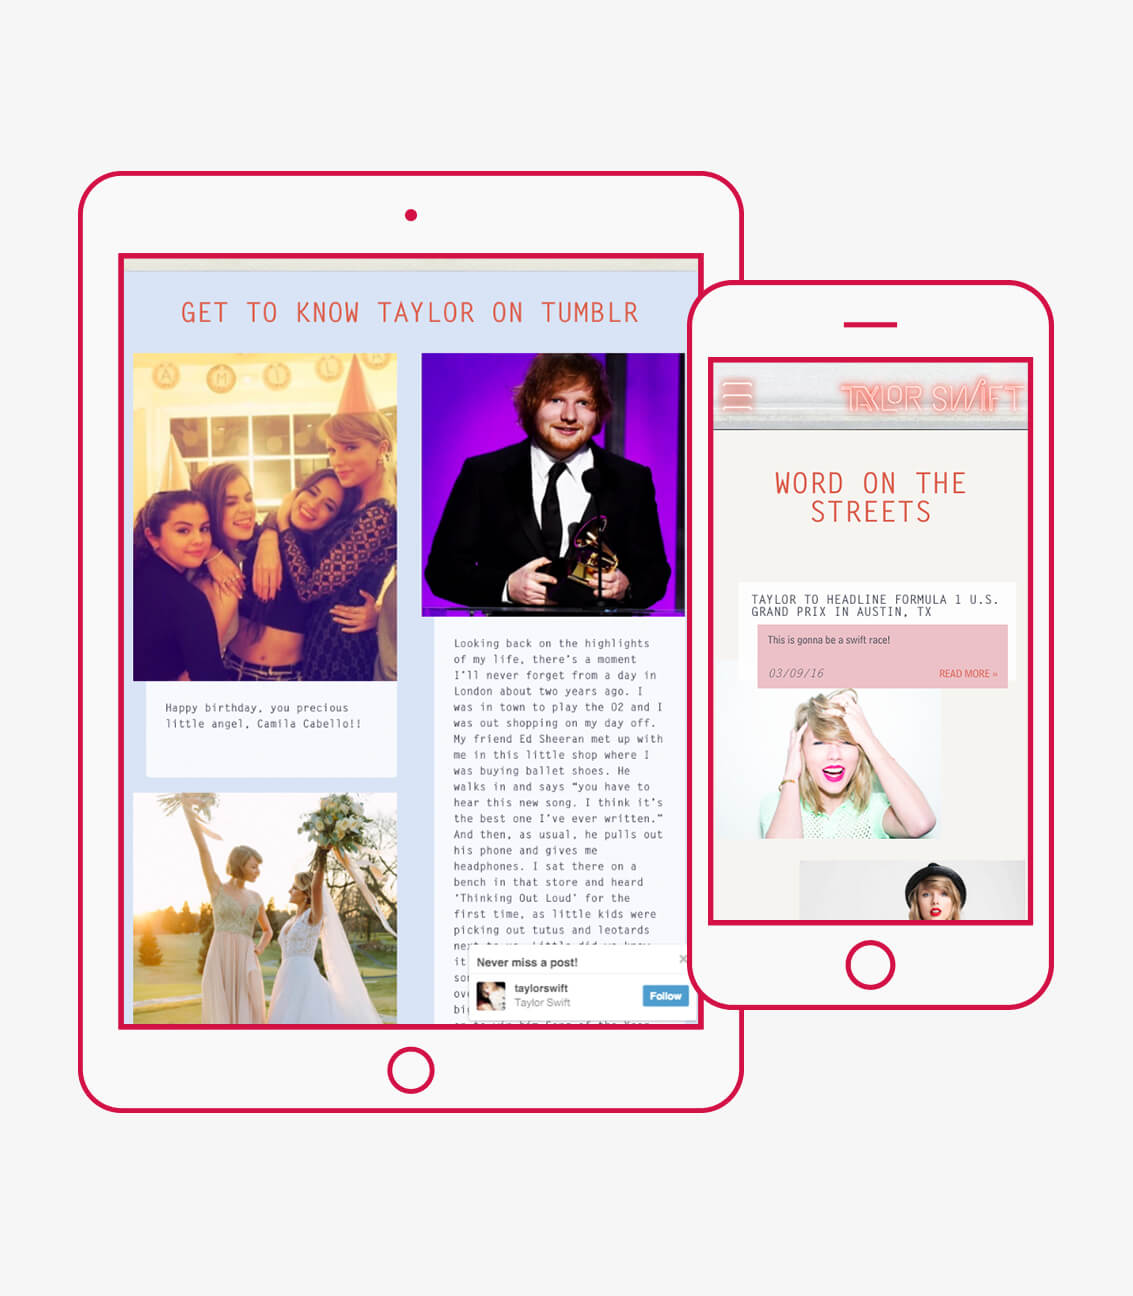 Responsive news webpage design for taylorswift.com with branding elements for Taylor Swift and her 1989 album